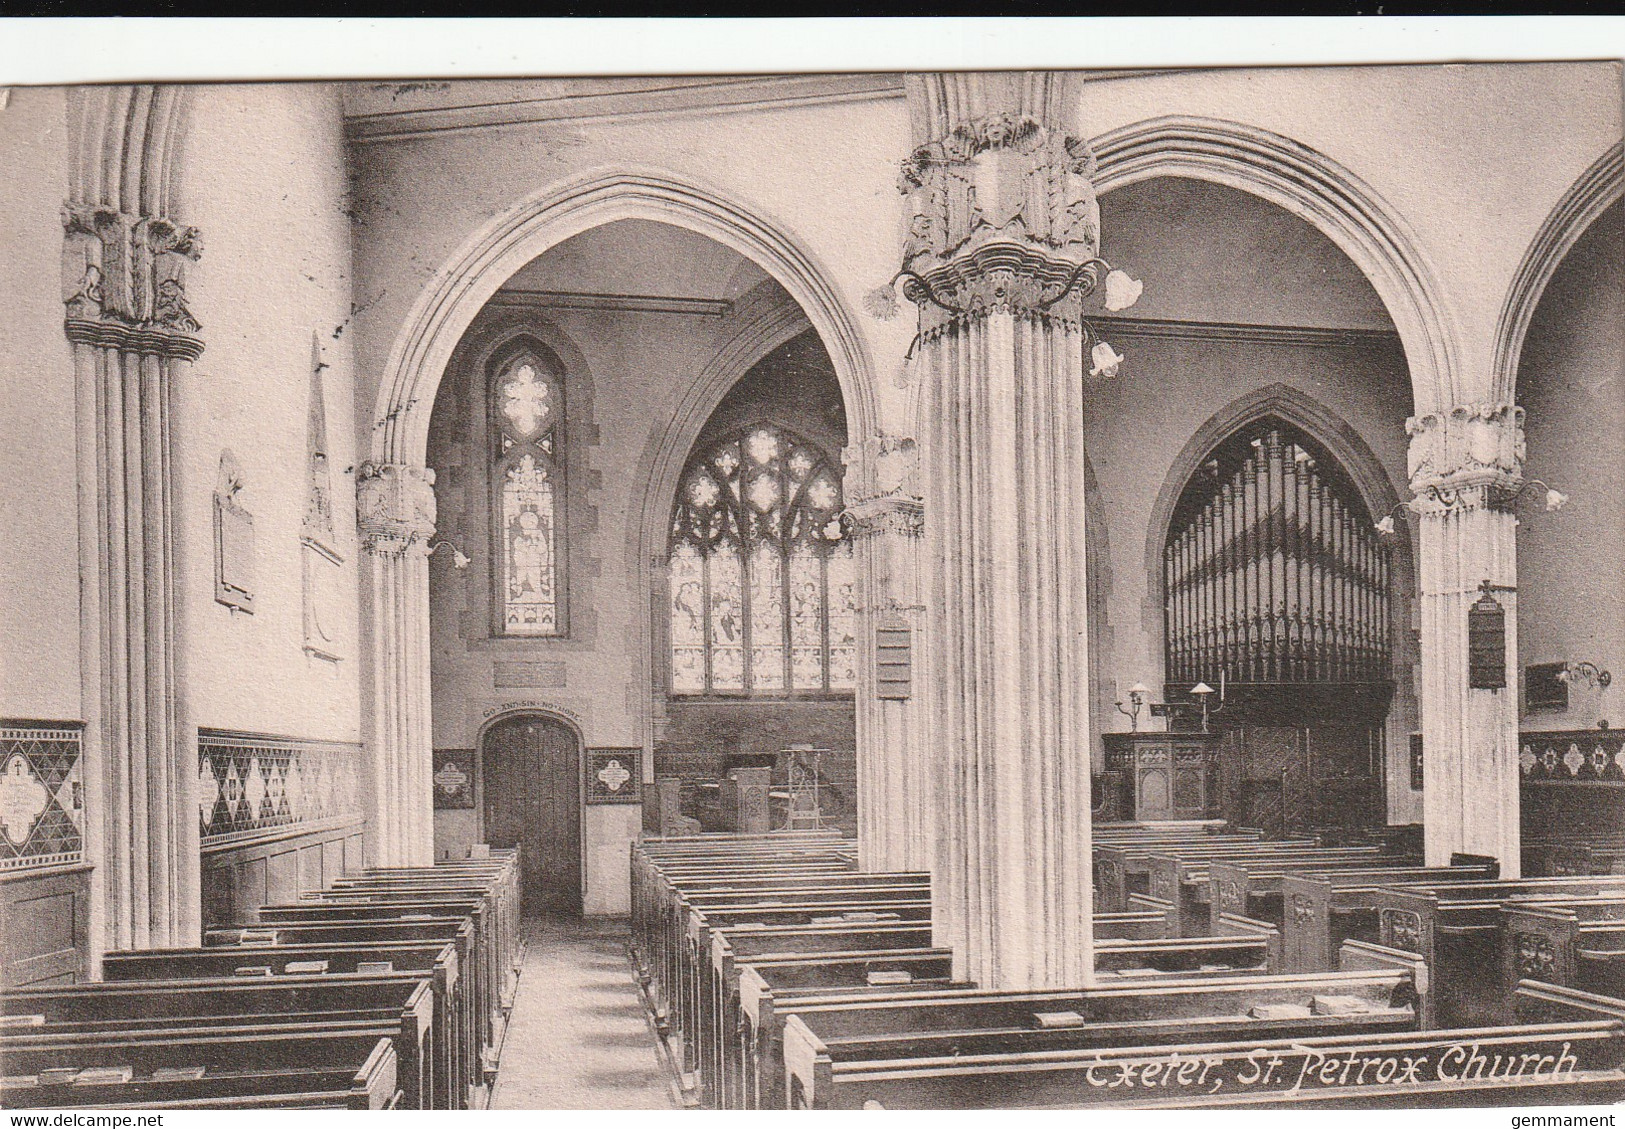 EXETER - ST PETROX CHURCH INTERIOR - Exeter